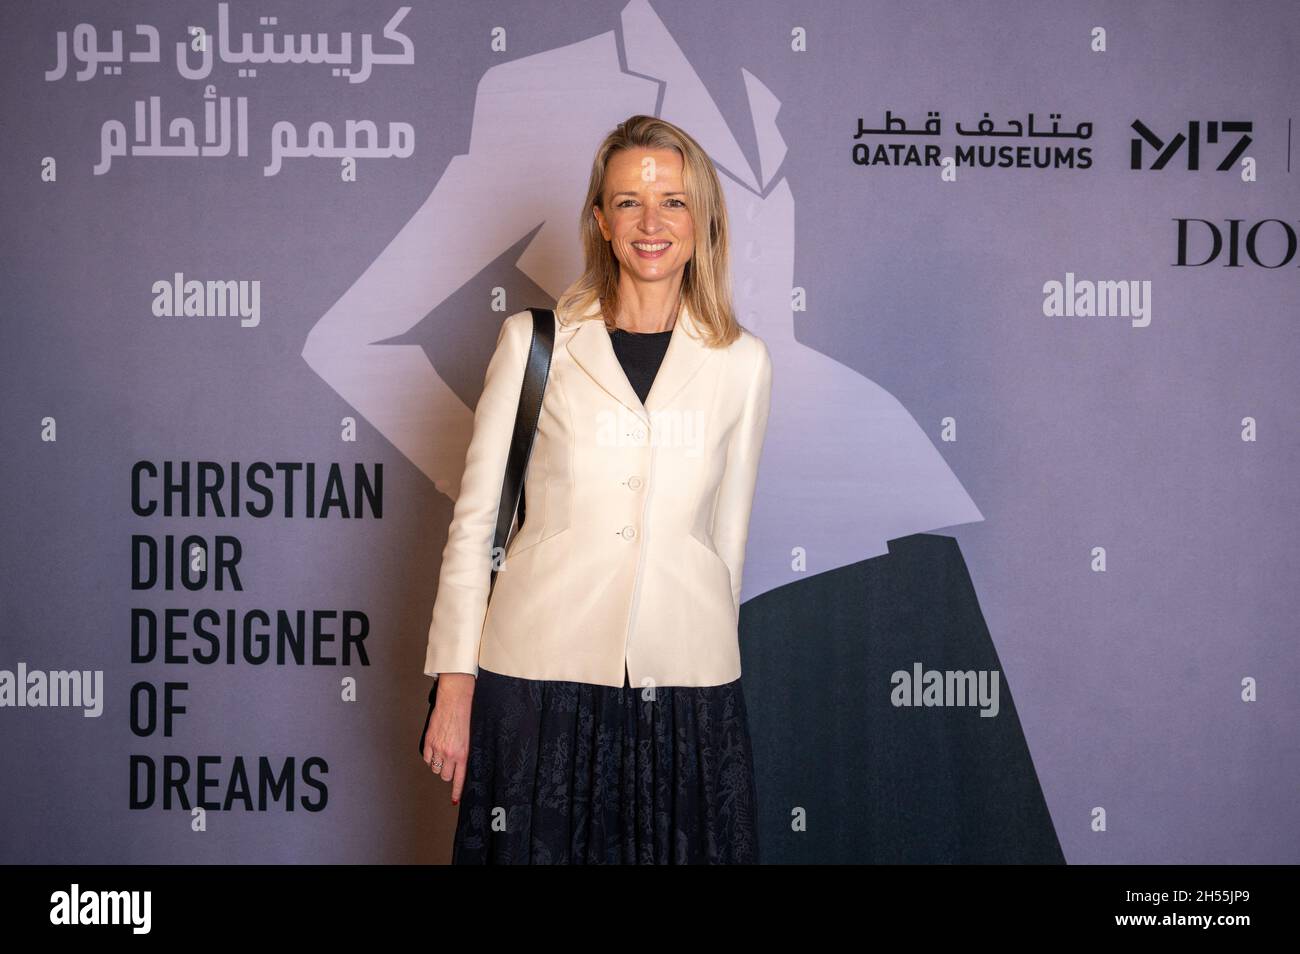 Delphine Arnault, Chairman and Chief Executive Officer of